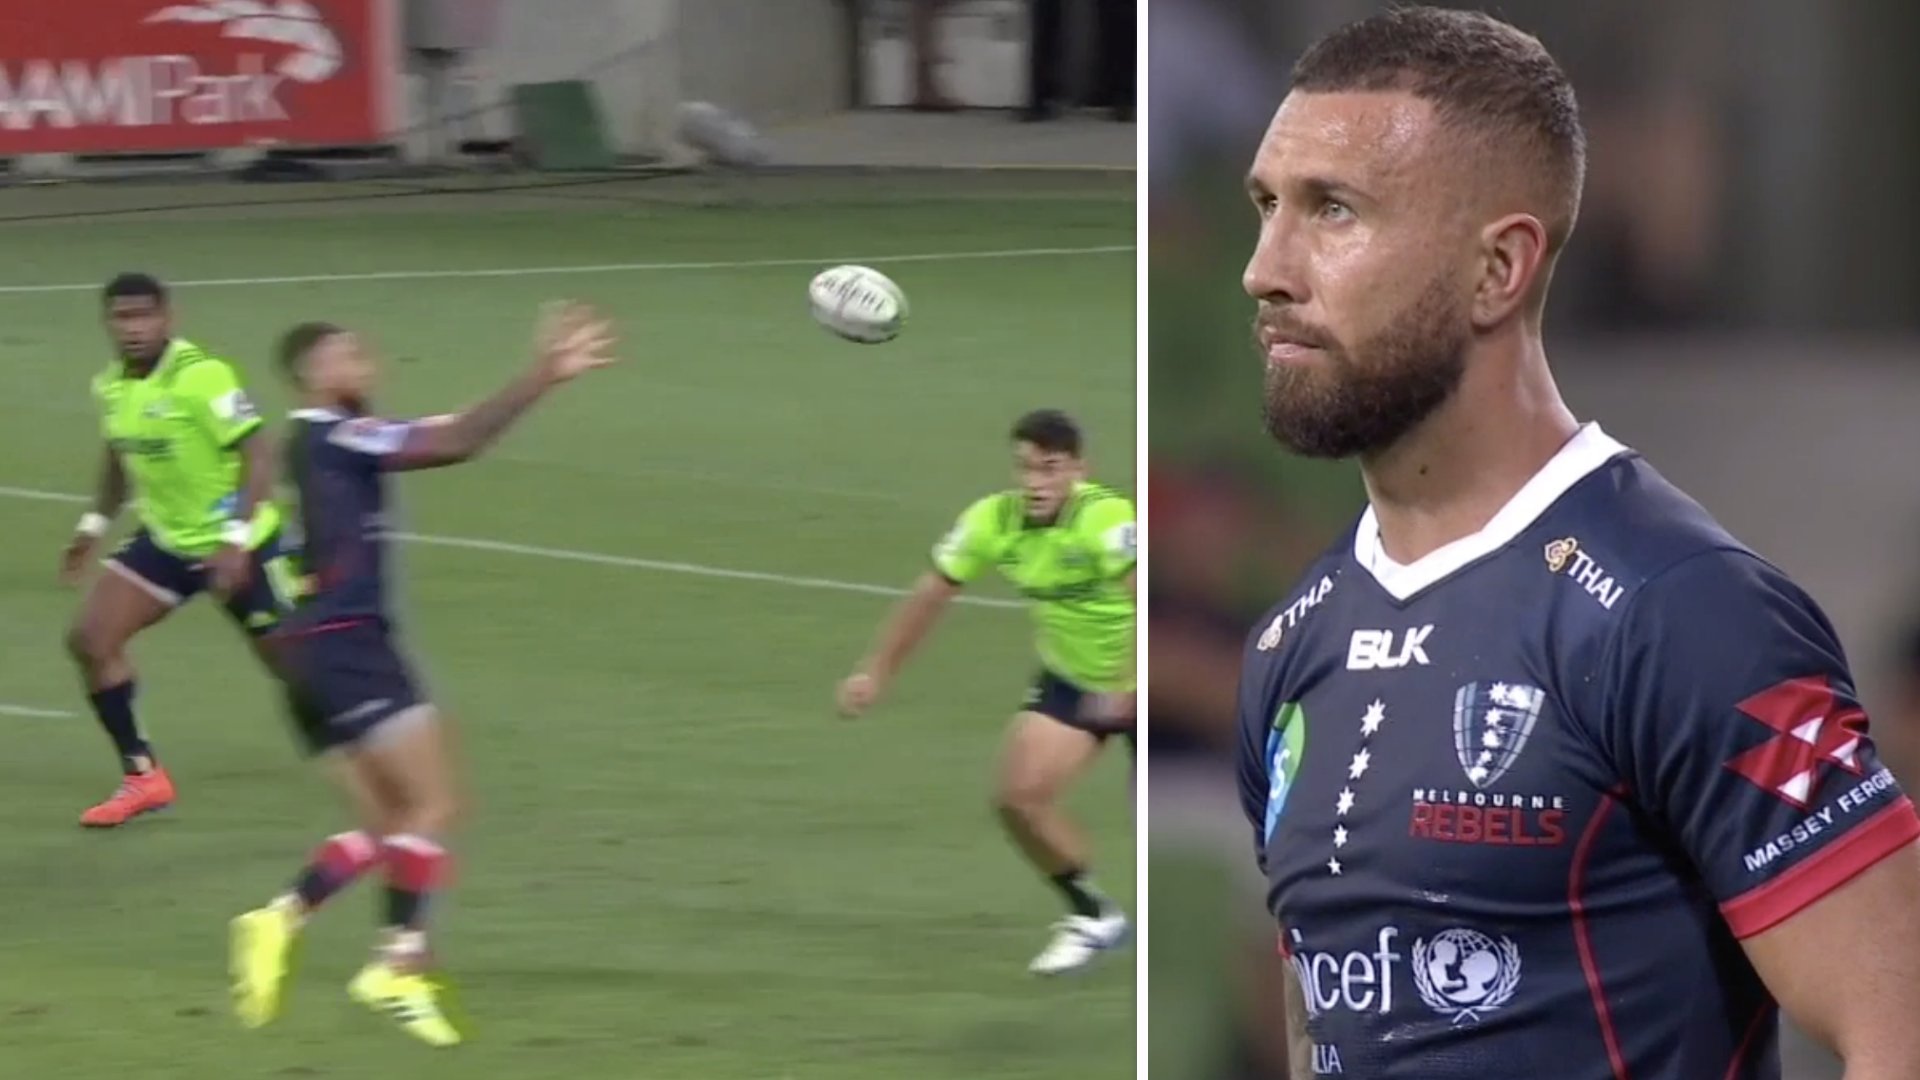 WATCH: Red hot Quade Cooper sets up TWO tries with ridiculous skill for the Rebels